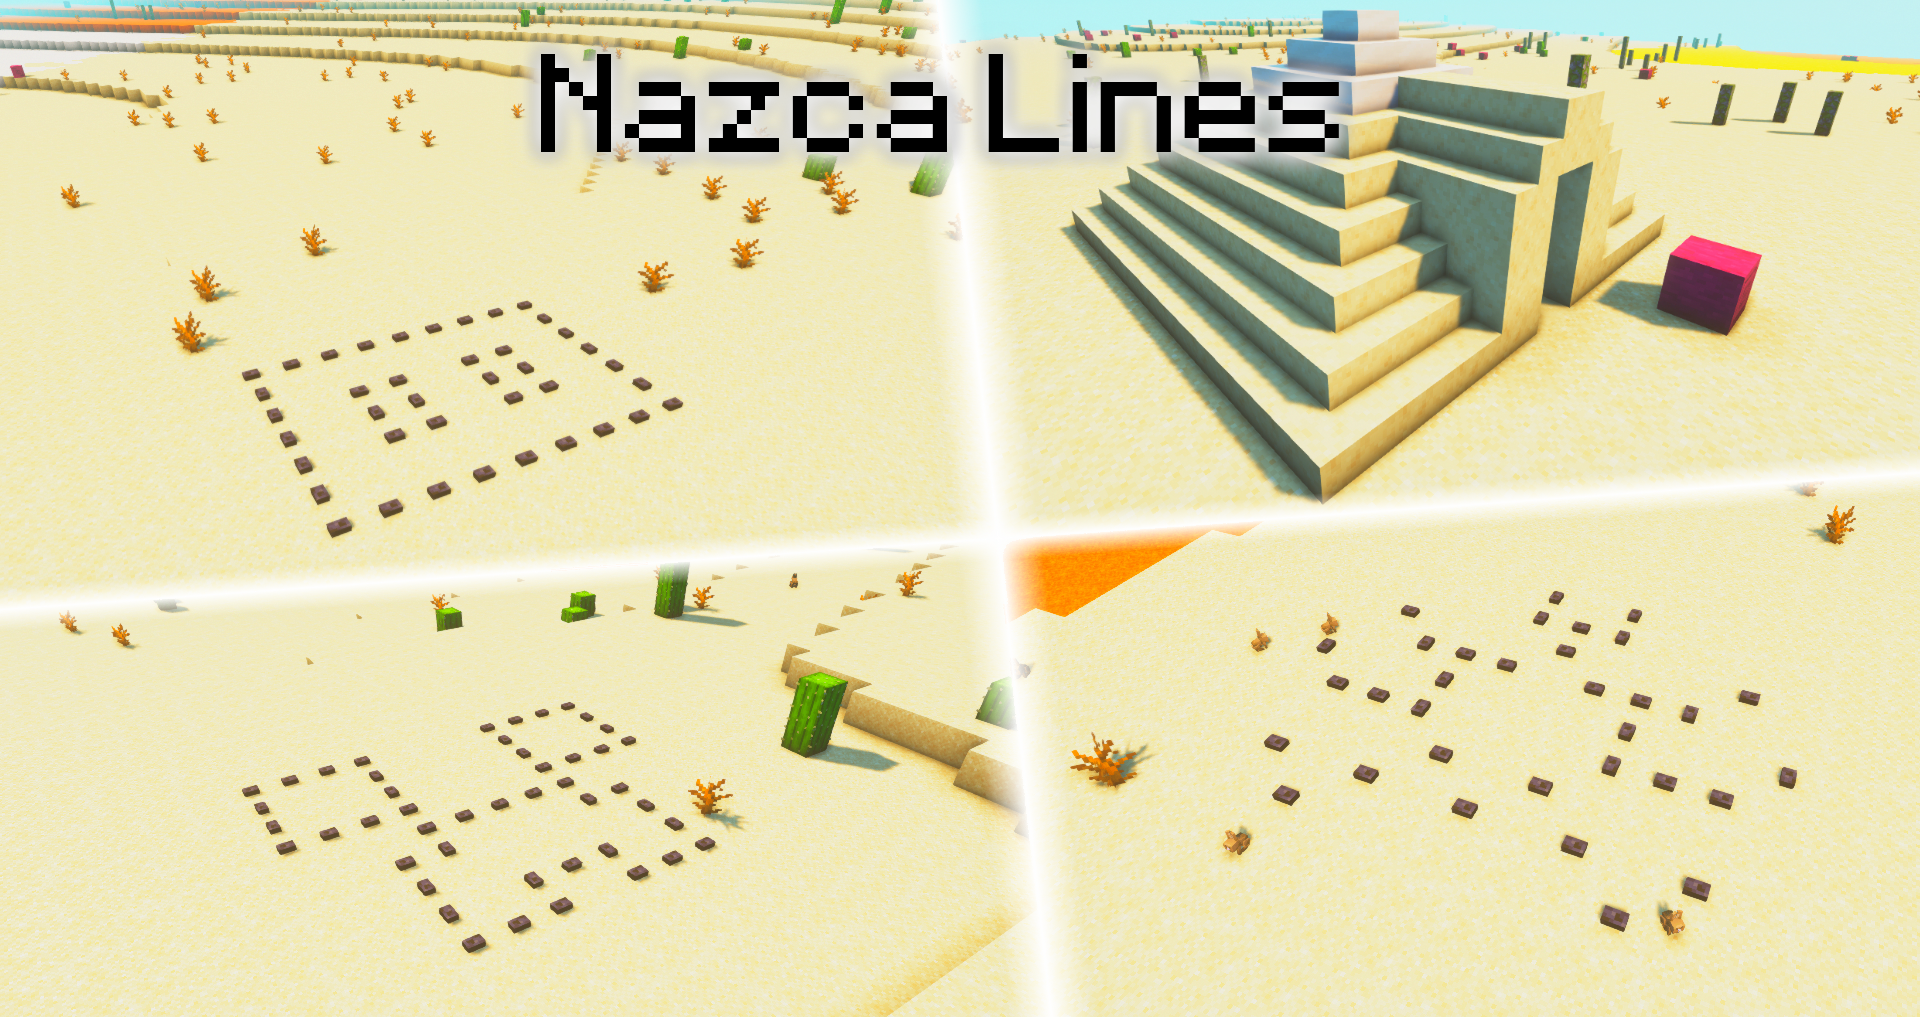 10. The Nazca Lines